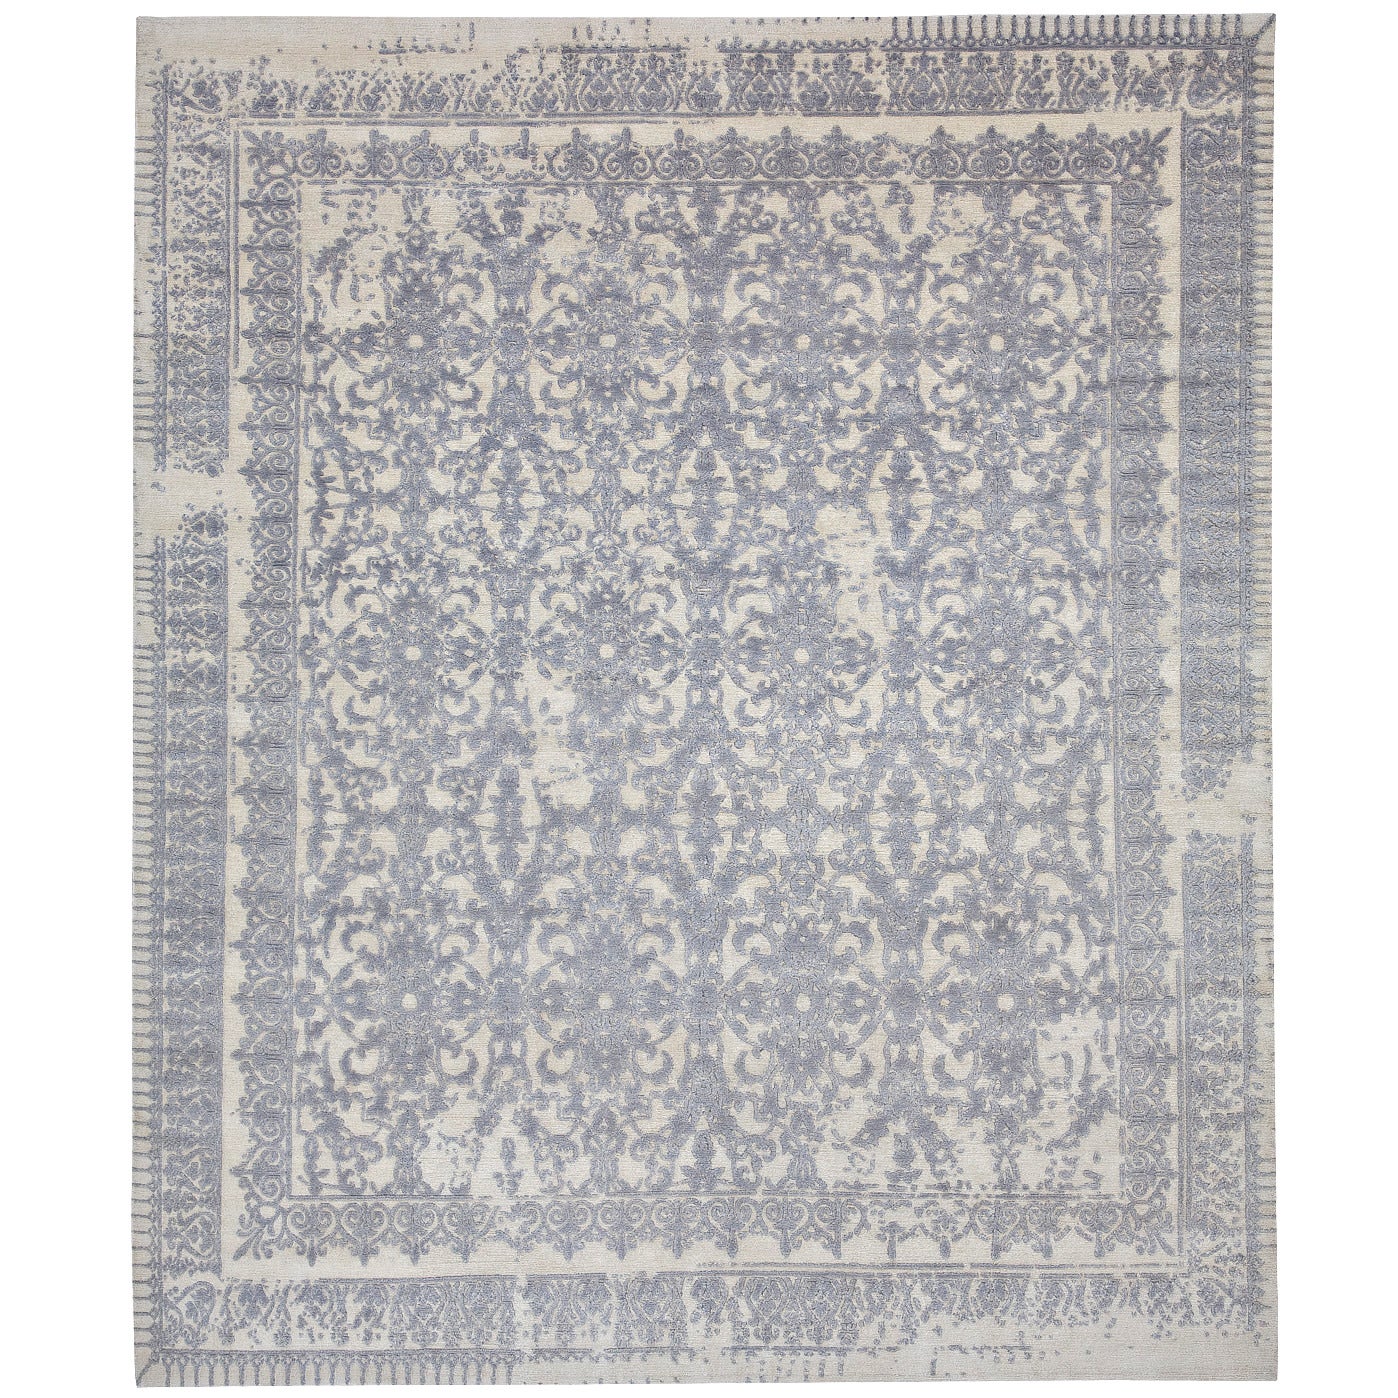 Ferrara Little Rocked from the Erased Classic Carpet Collection by Jan Kath For Sale